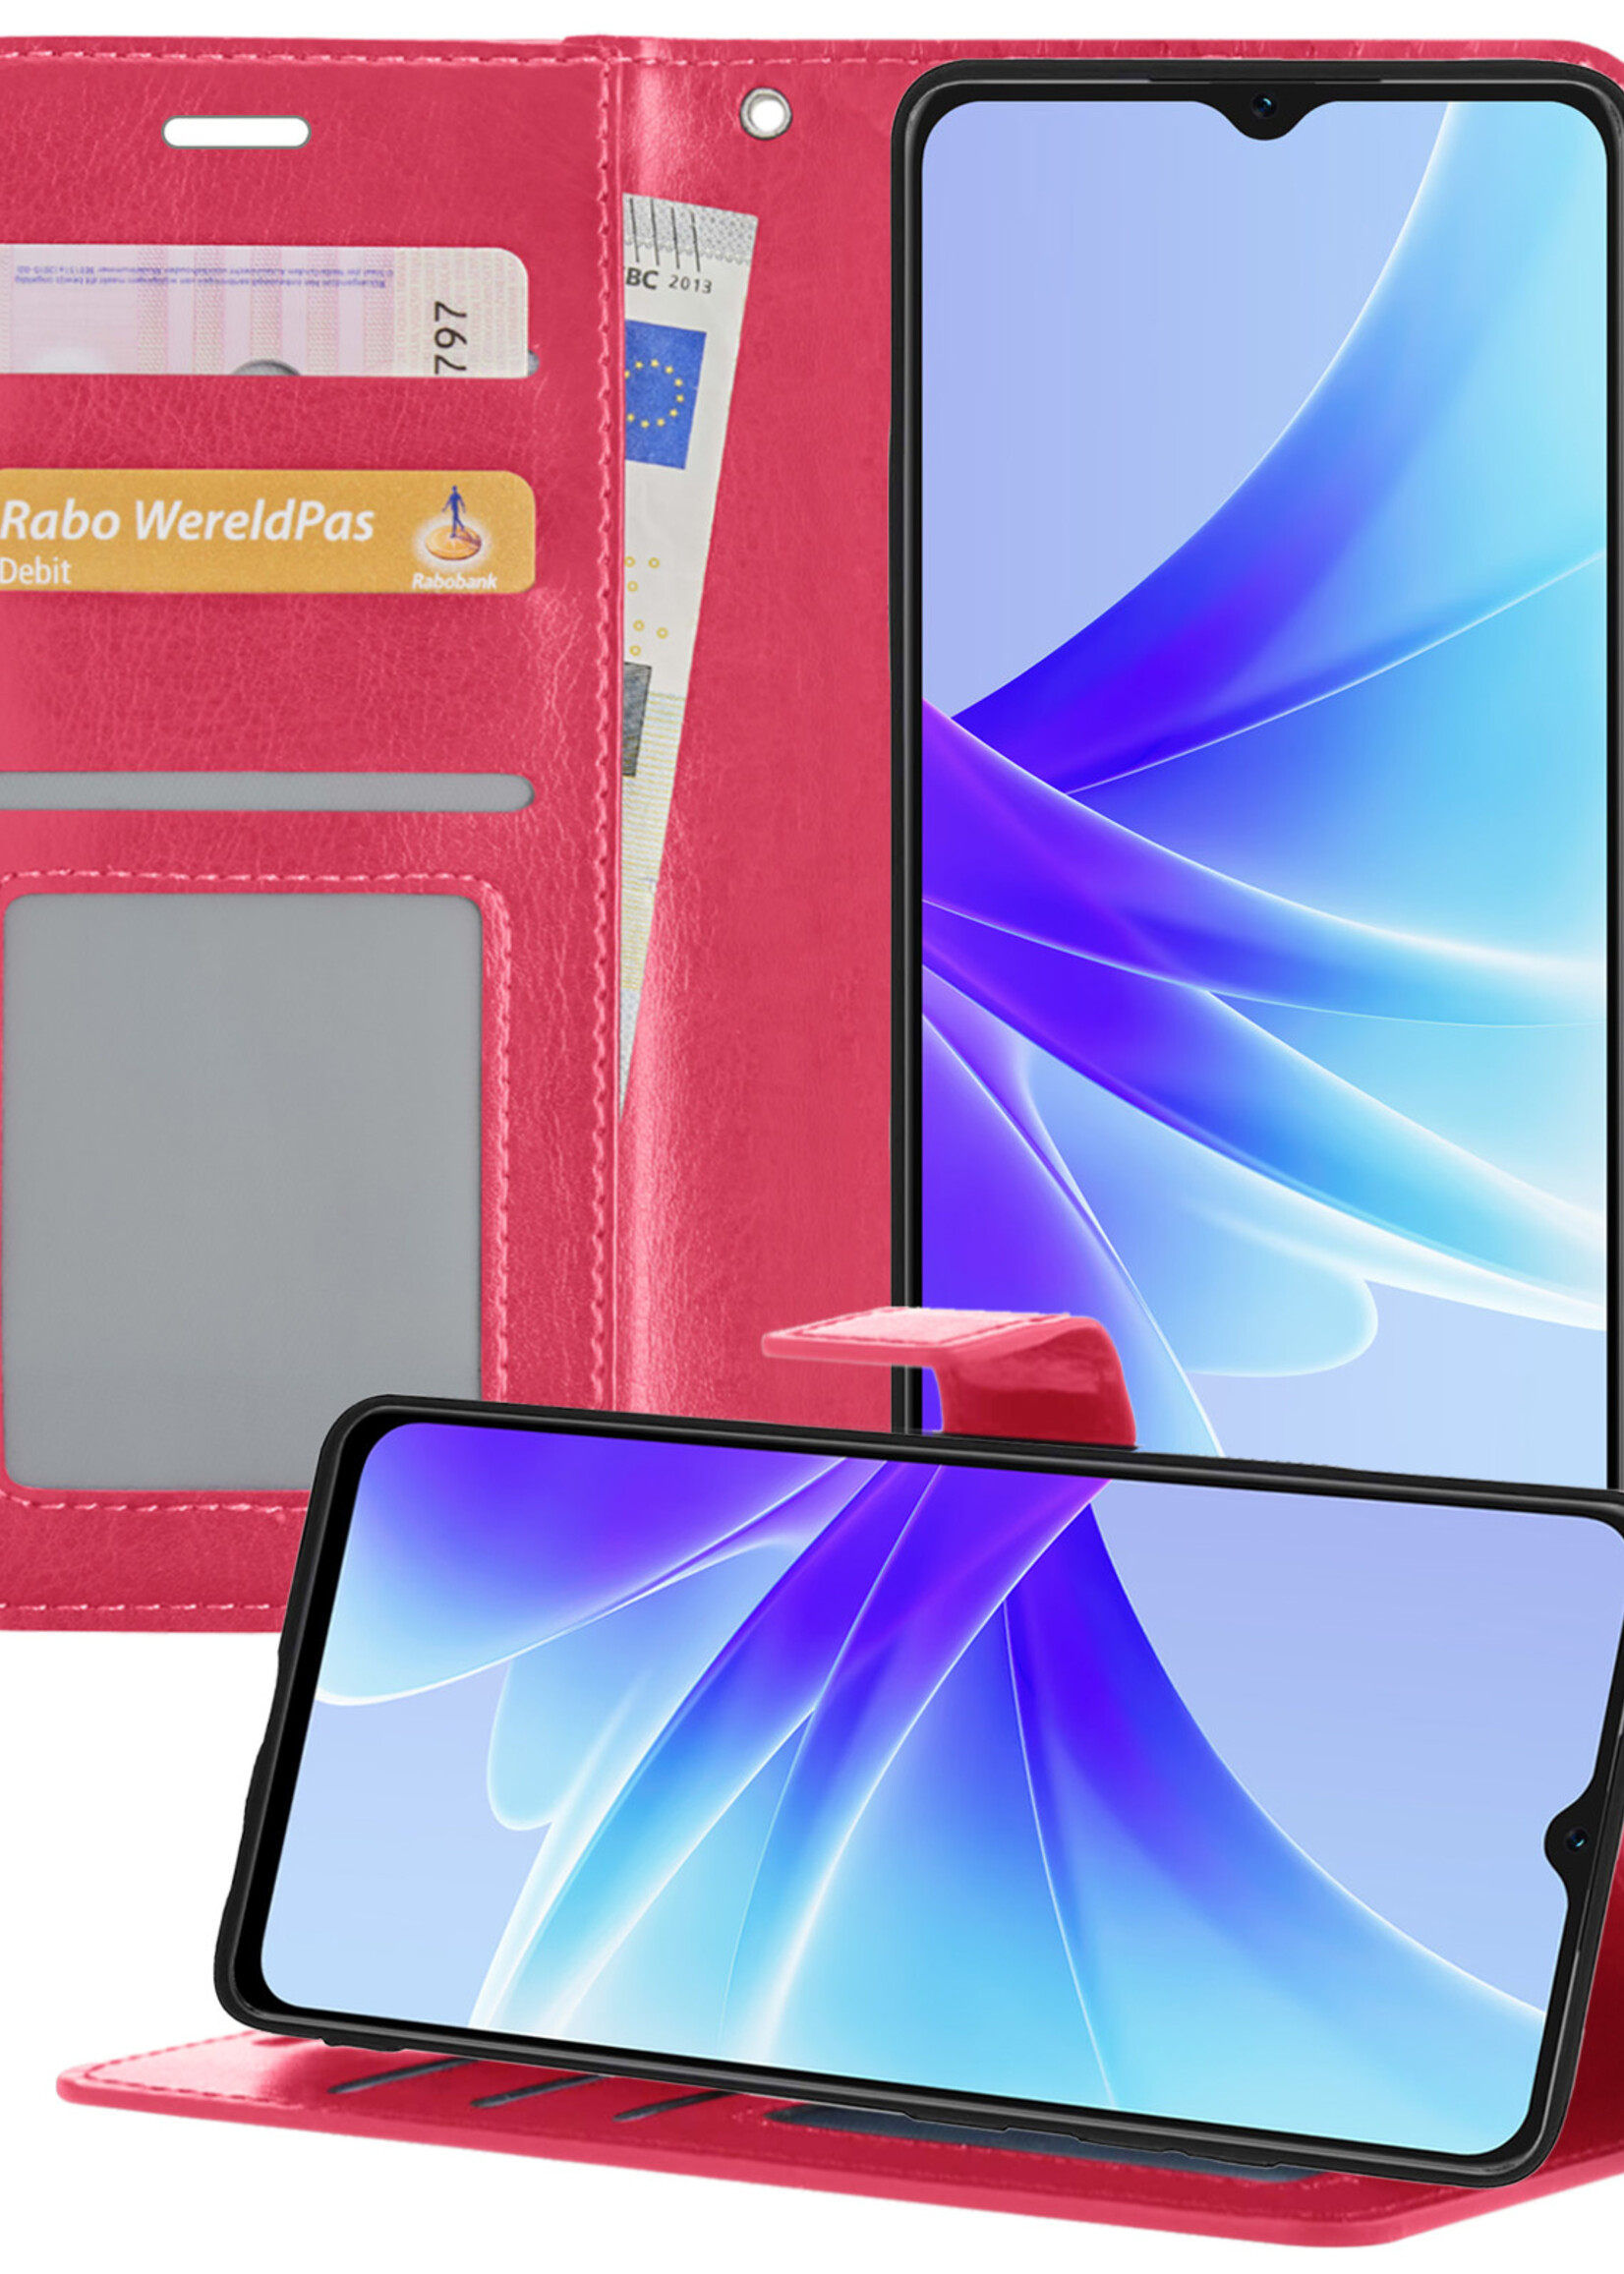 BTH Oppo A17 Hoesje Book Case Hoes Portemonnee Cover Walletcase - Oppo A17 Hoes Bookcase Hoesje - Donkerroze